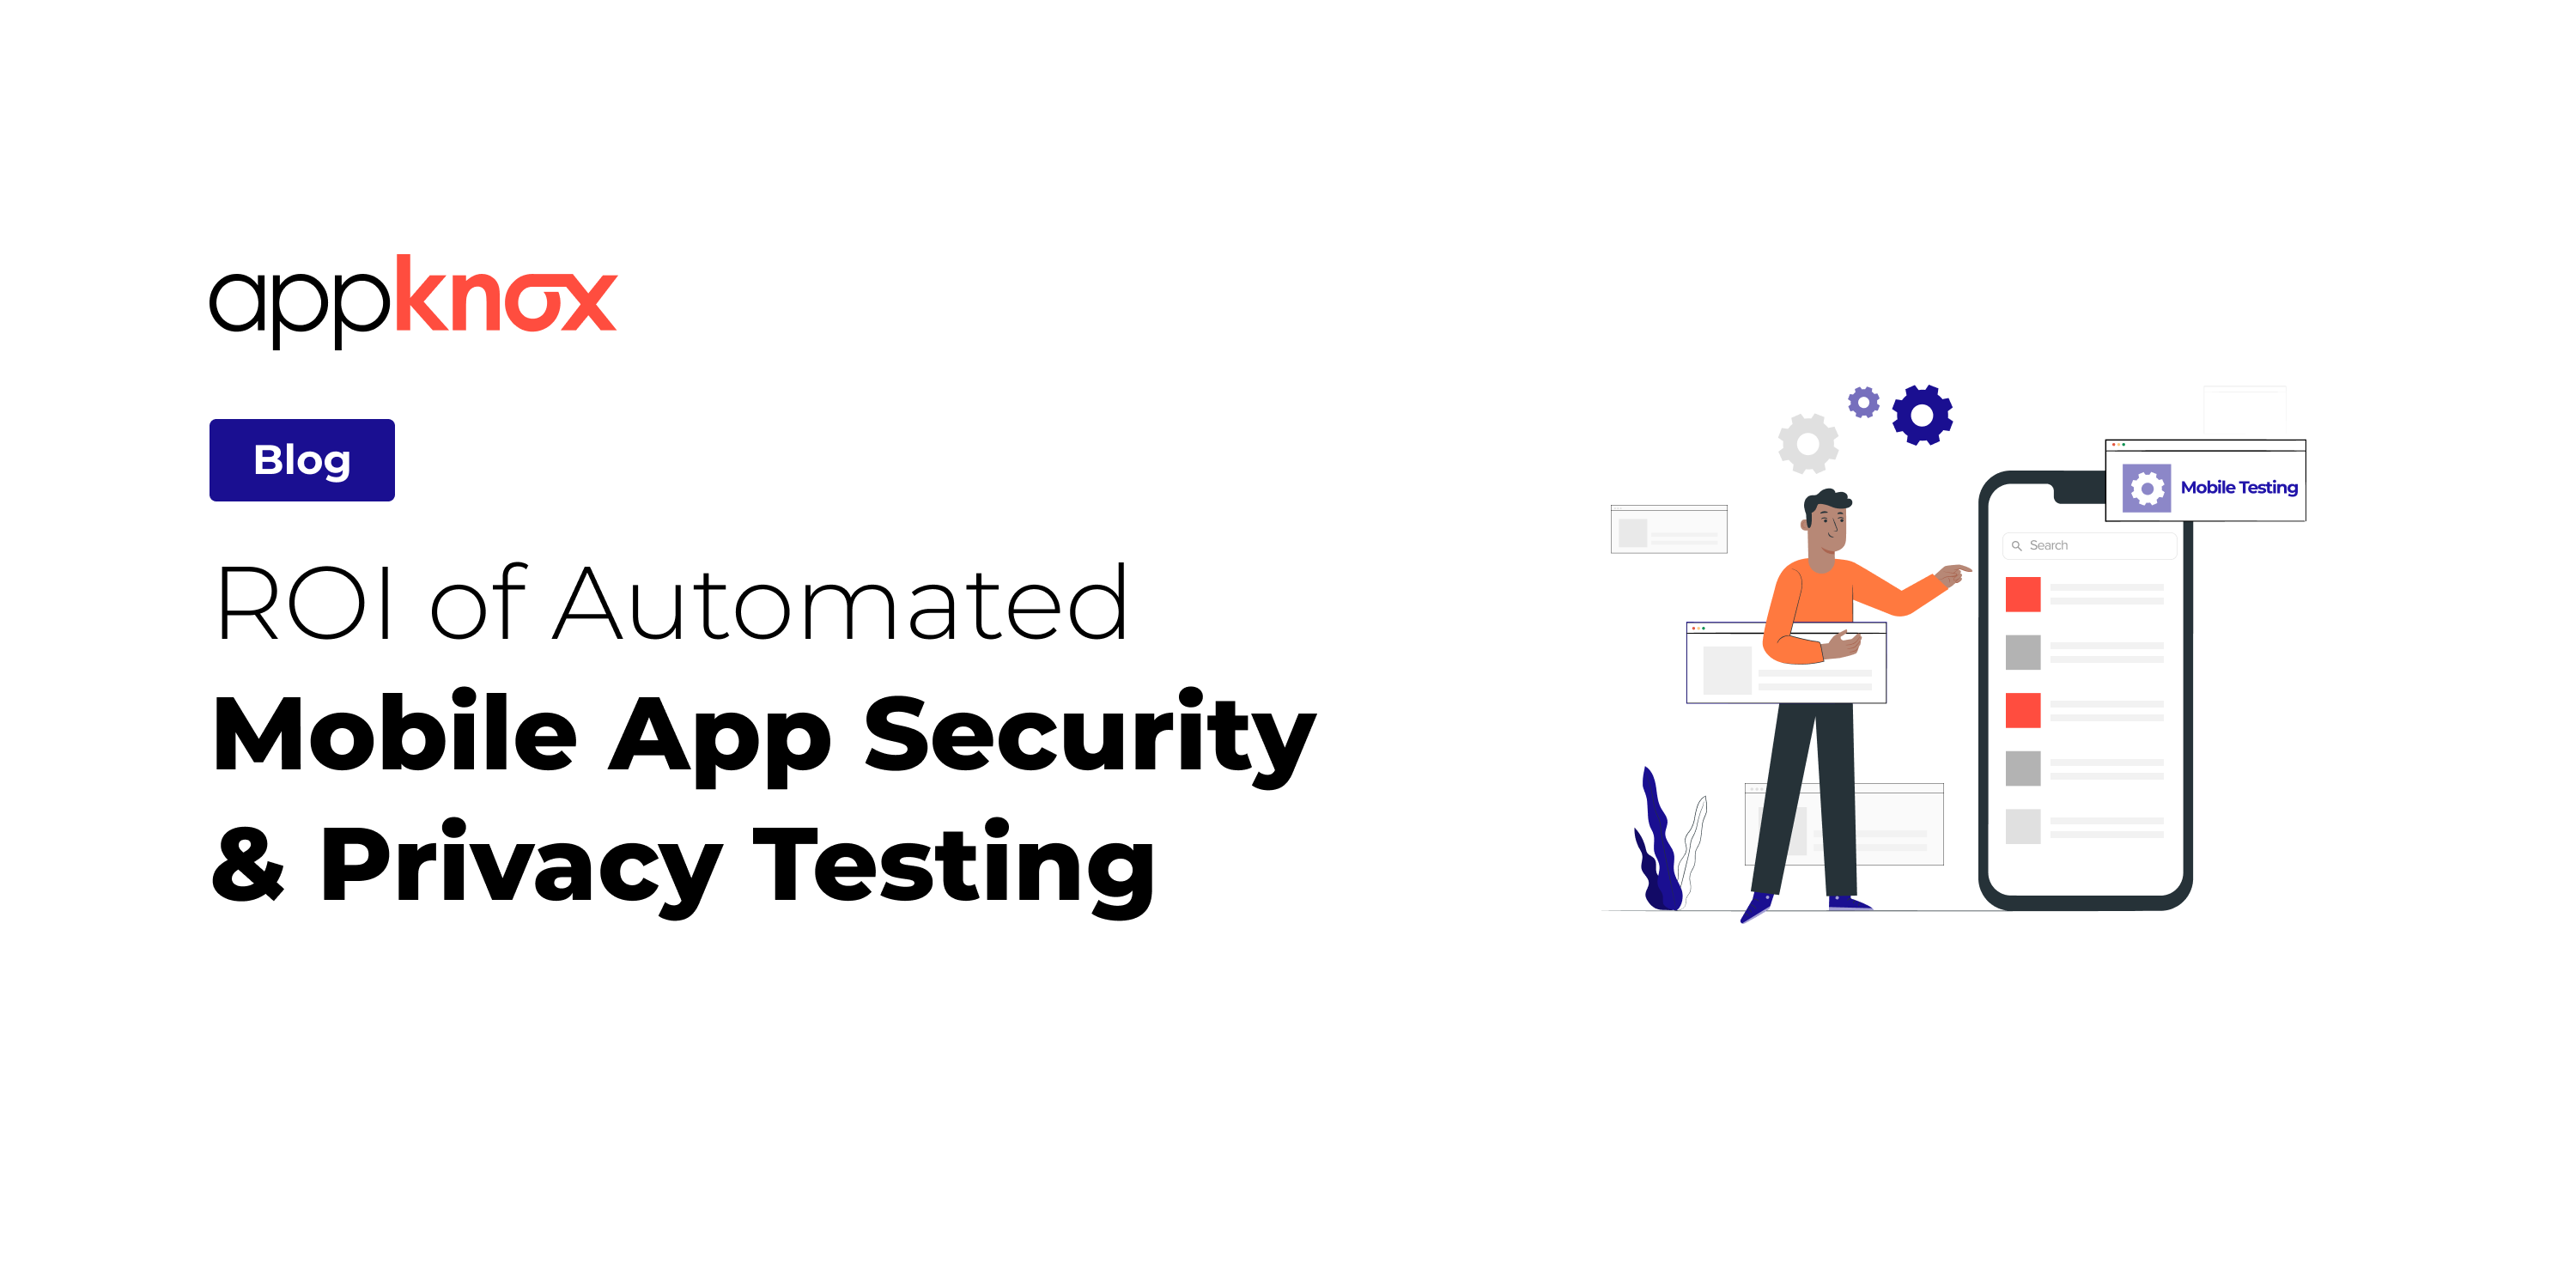 ROI of Automated Mobile App Security & Privacy Testing